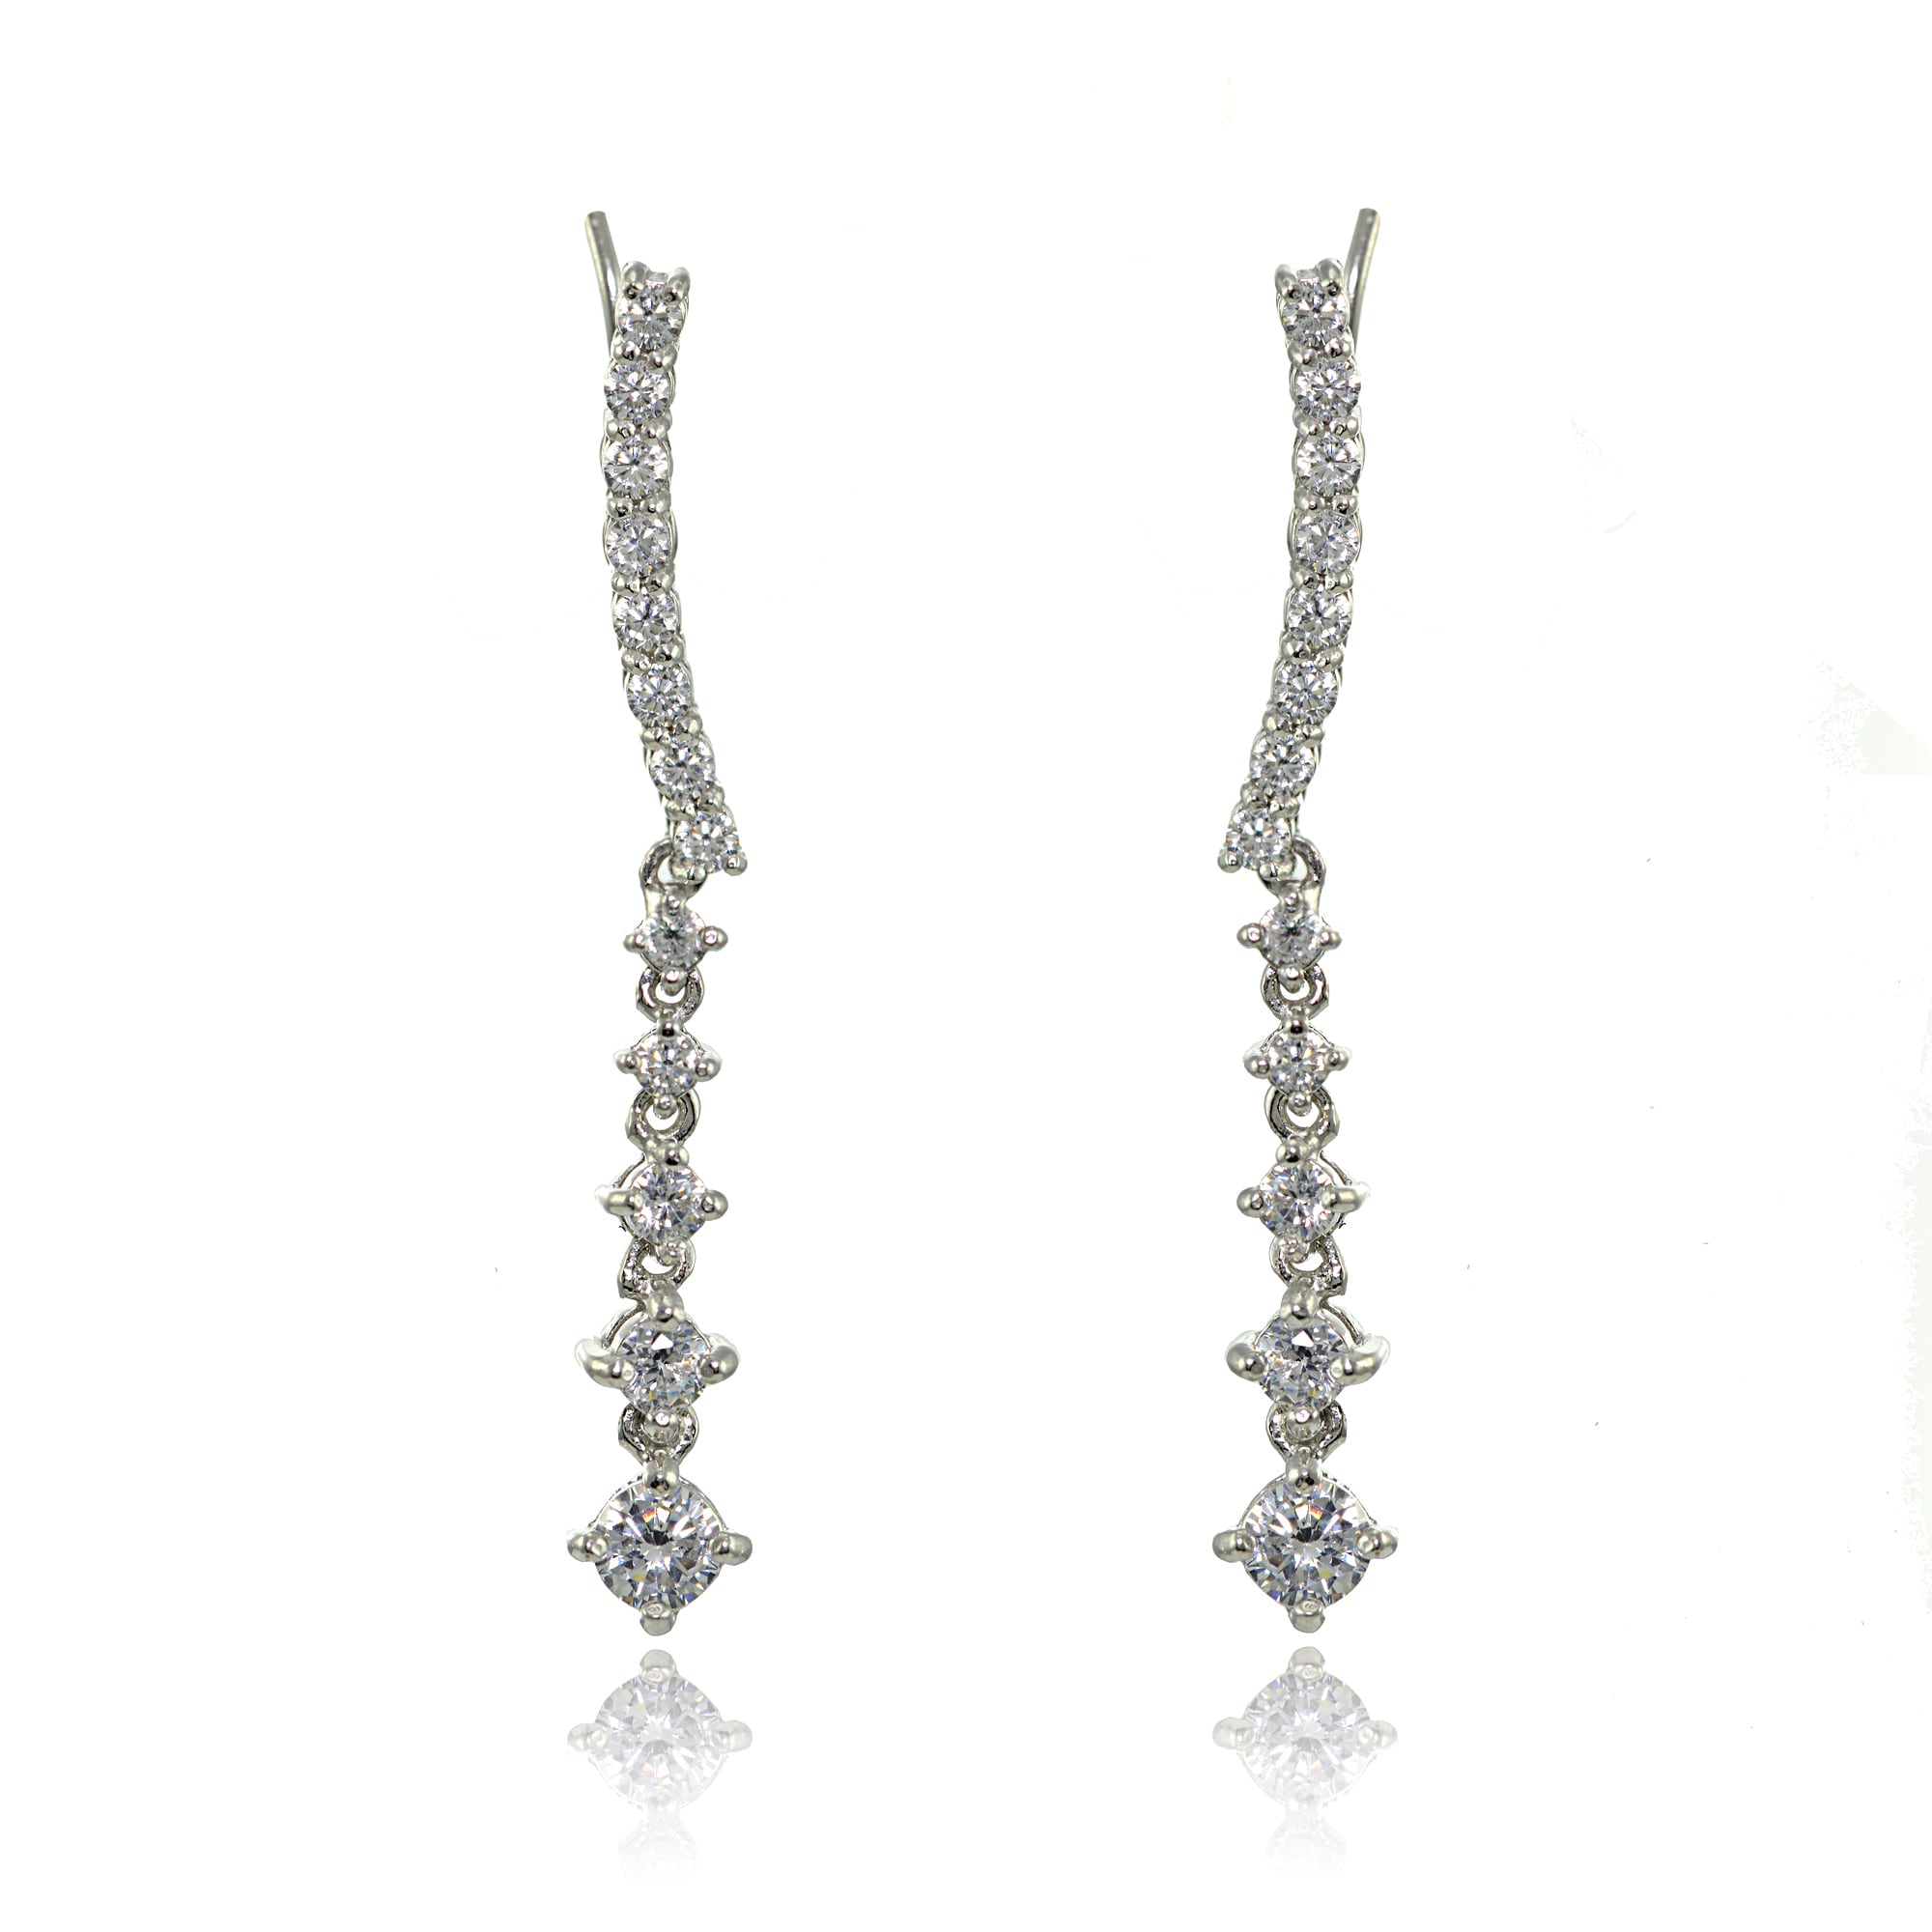 Round Cut White Cubic Zirconia Climbers Earrings In 14K White Gold Over Sterling Silver